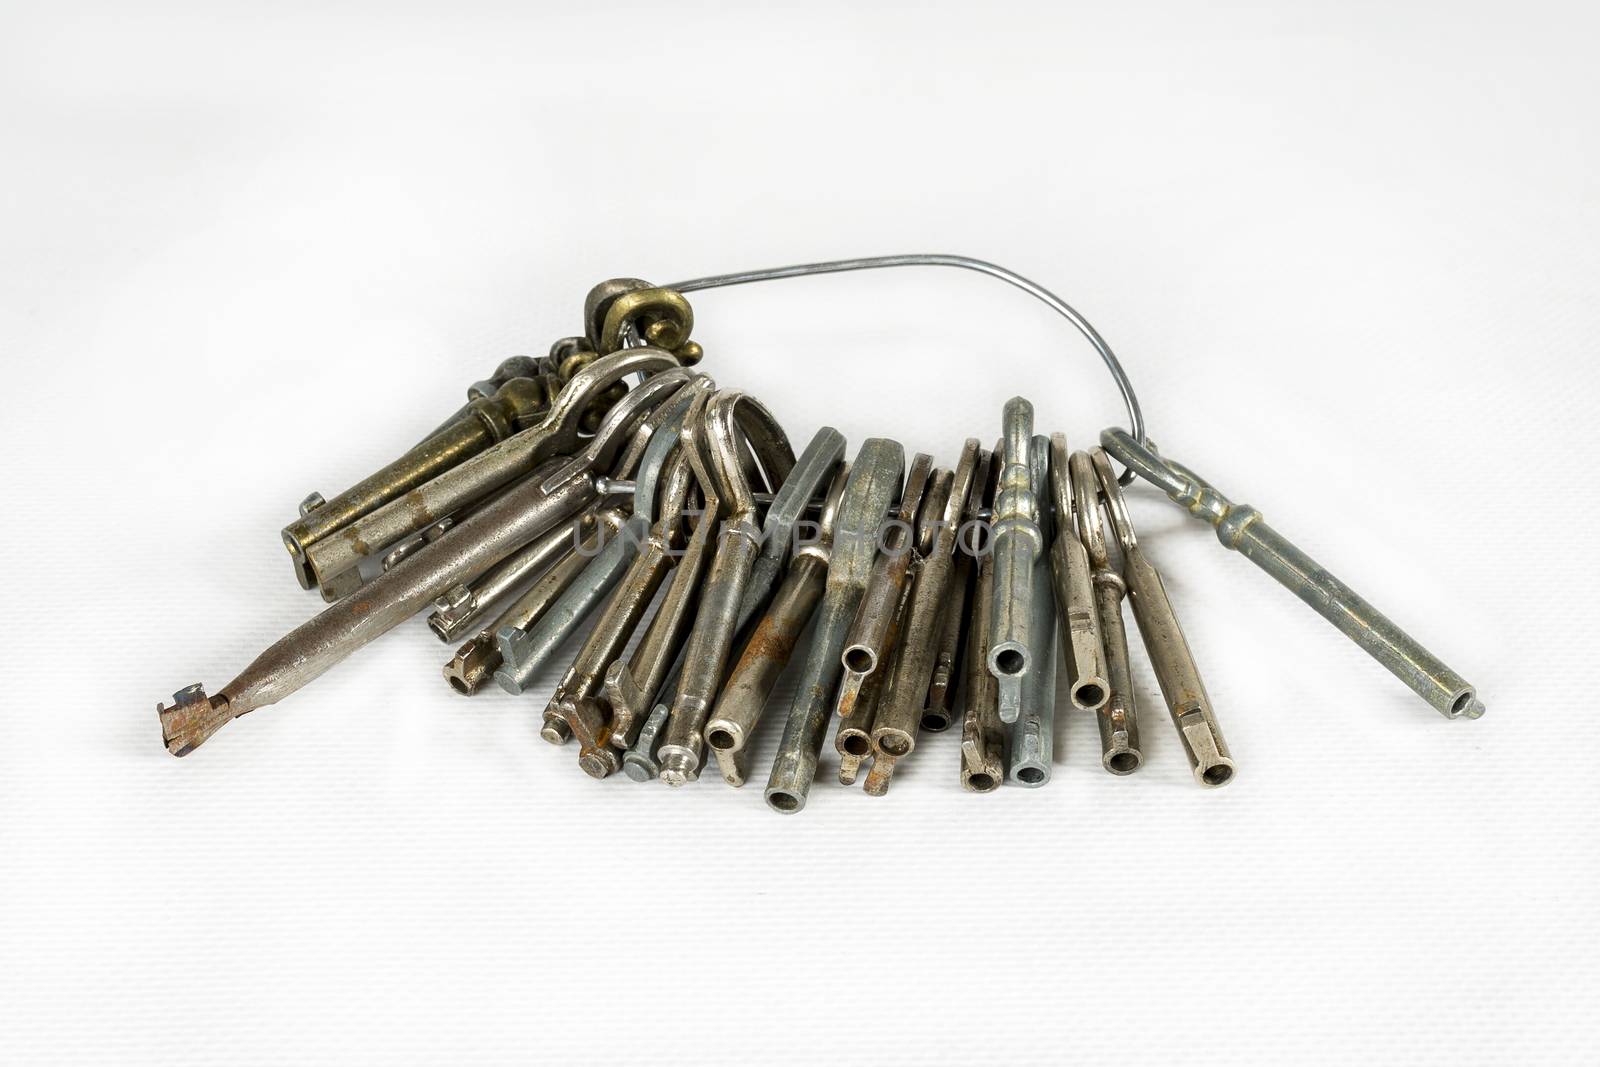 A set of old keys. Isolated over white background by 977_ReX_977